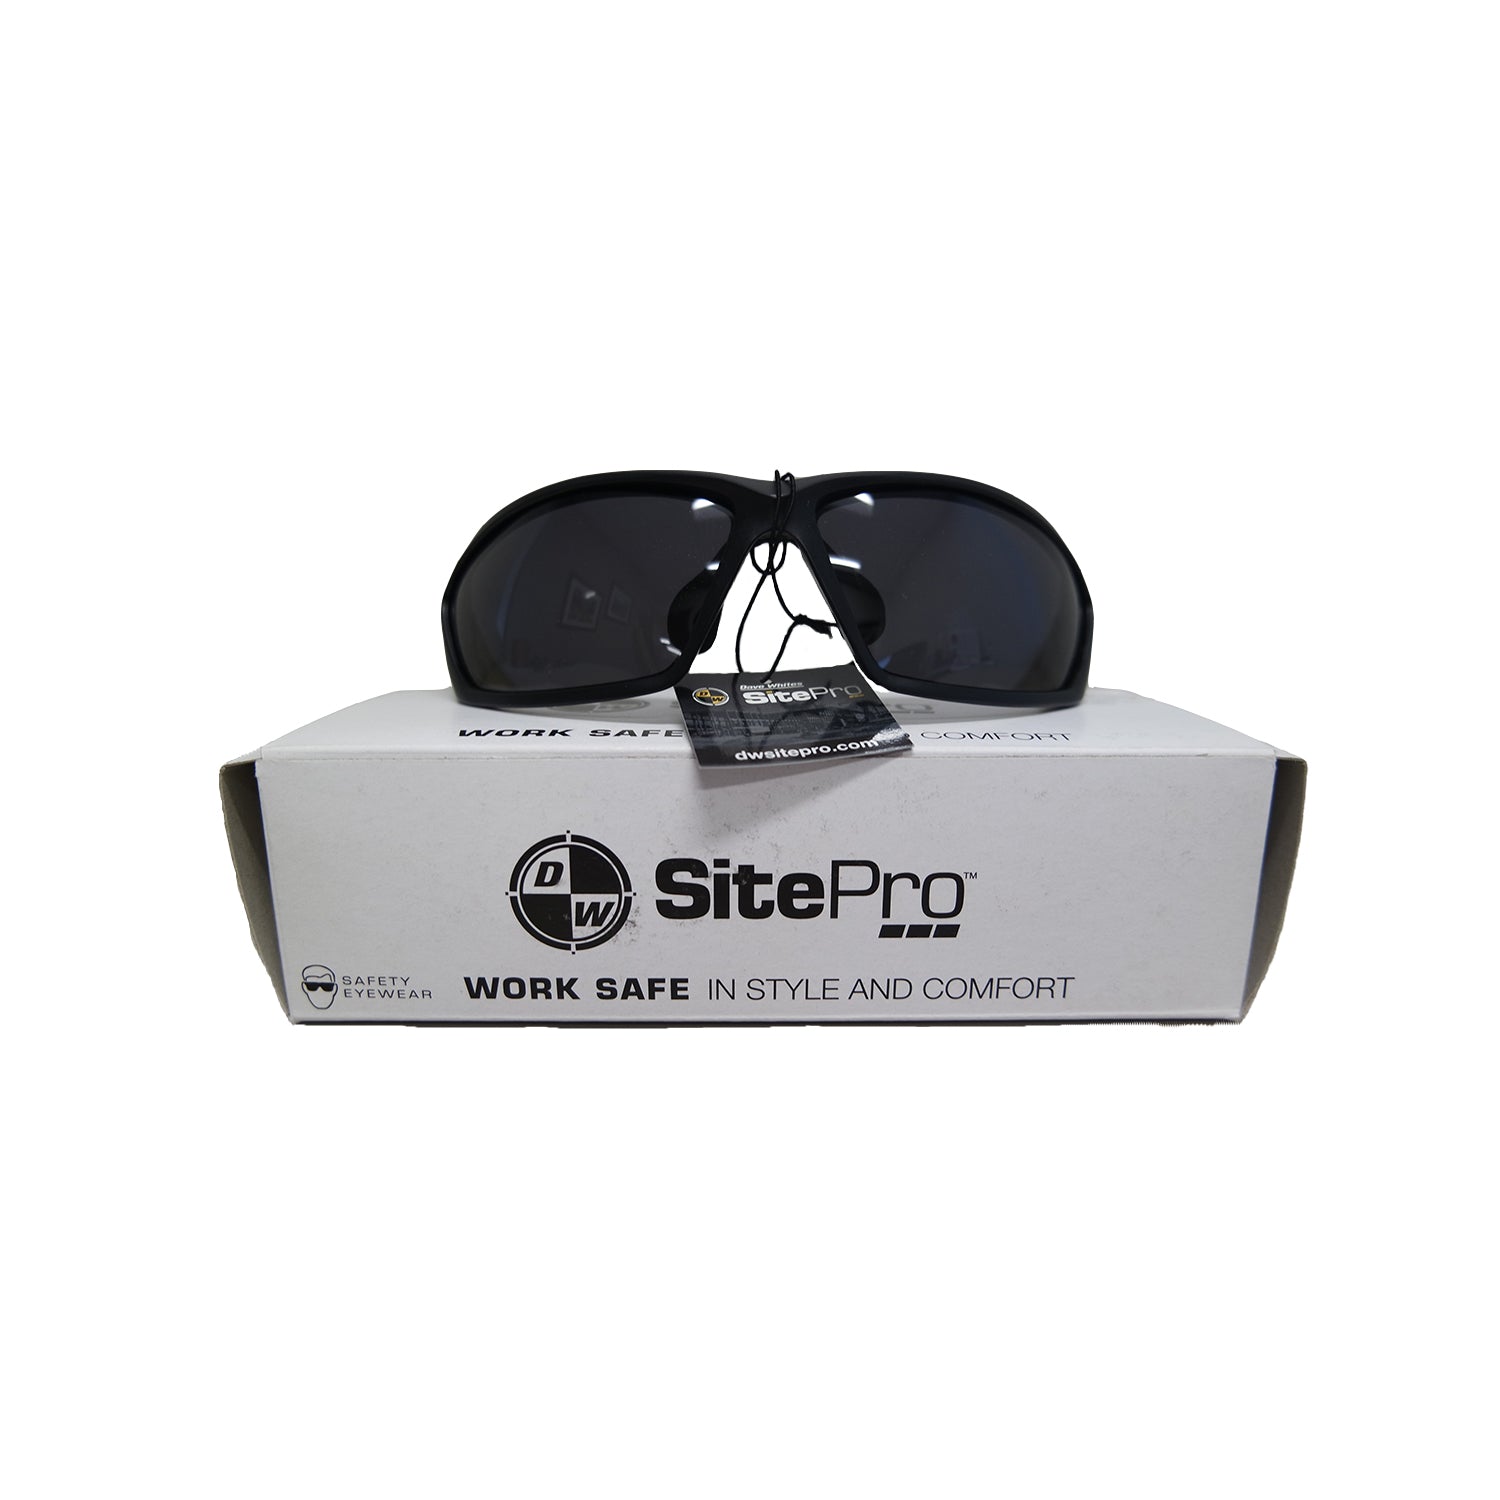 SitePro Safety Glasses, Polarized, Black frame with yellow accents -Safety- eGPS Solutions Inc.